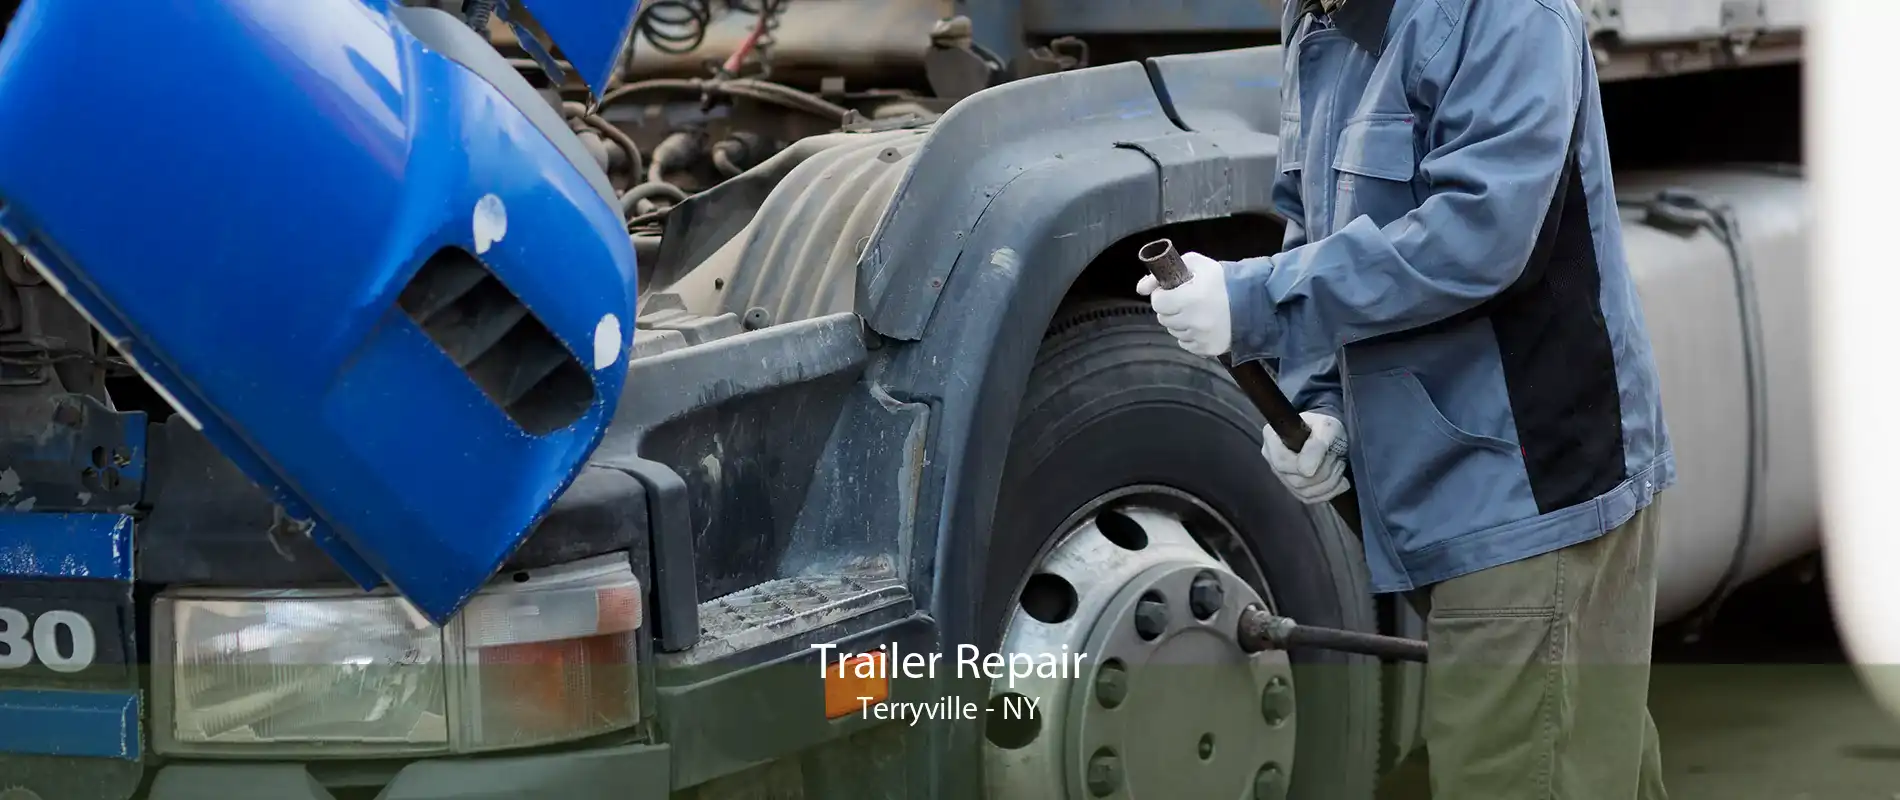 Trailer Repair Terryville - NY